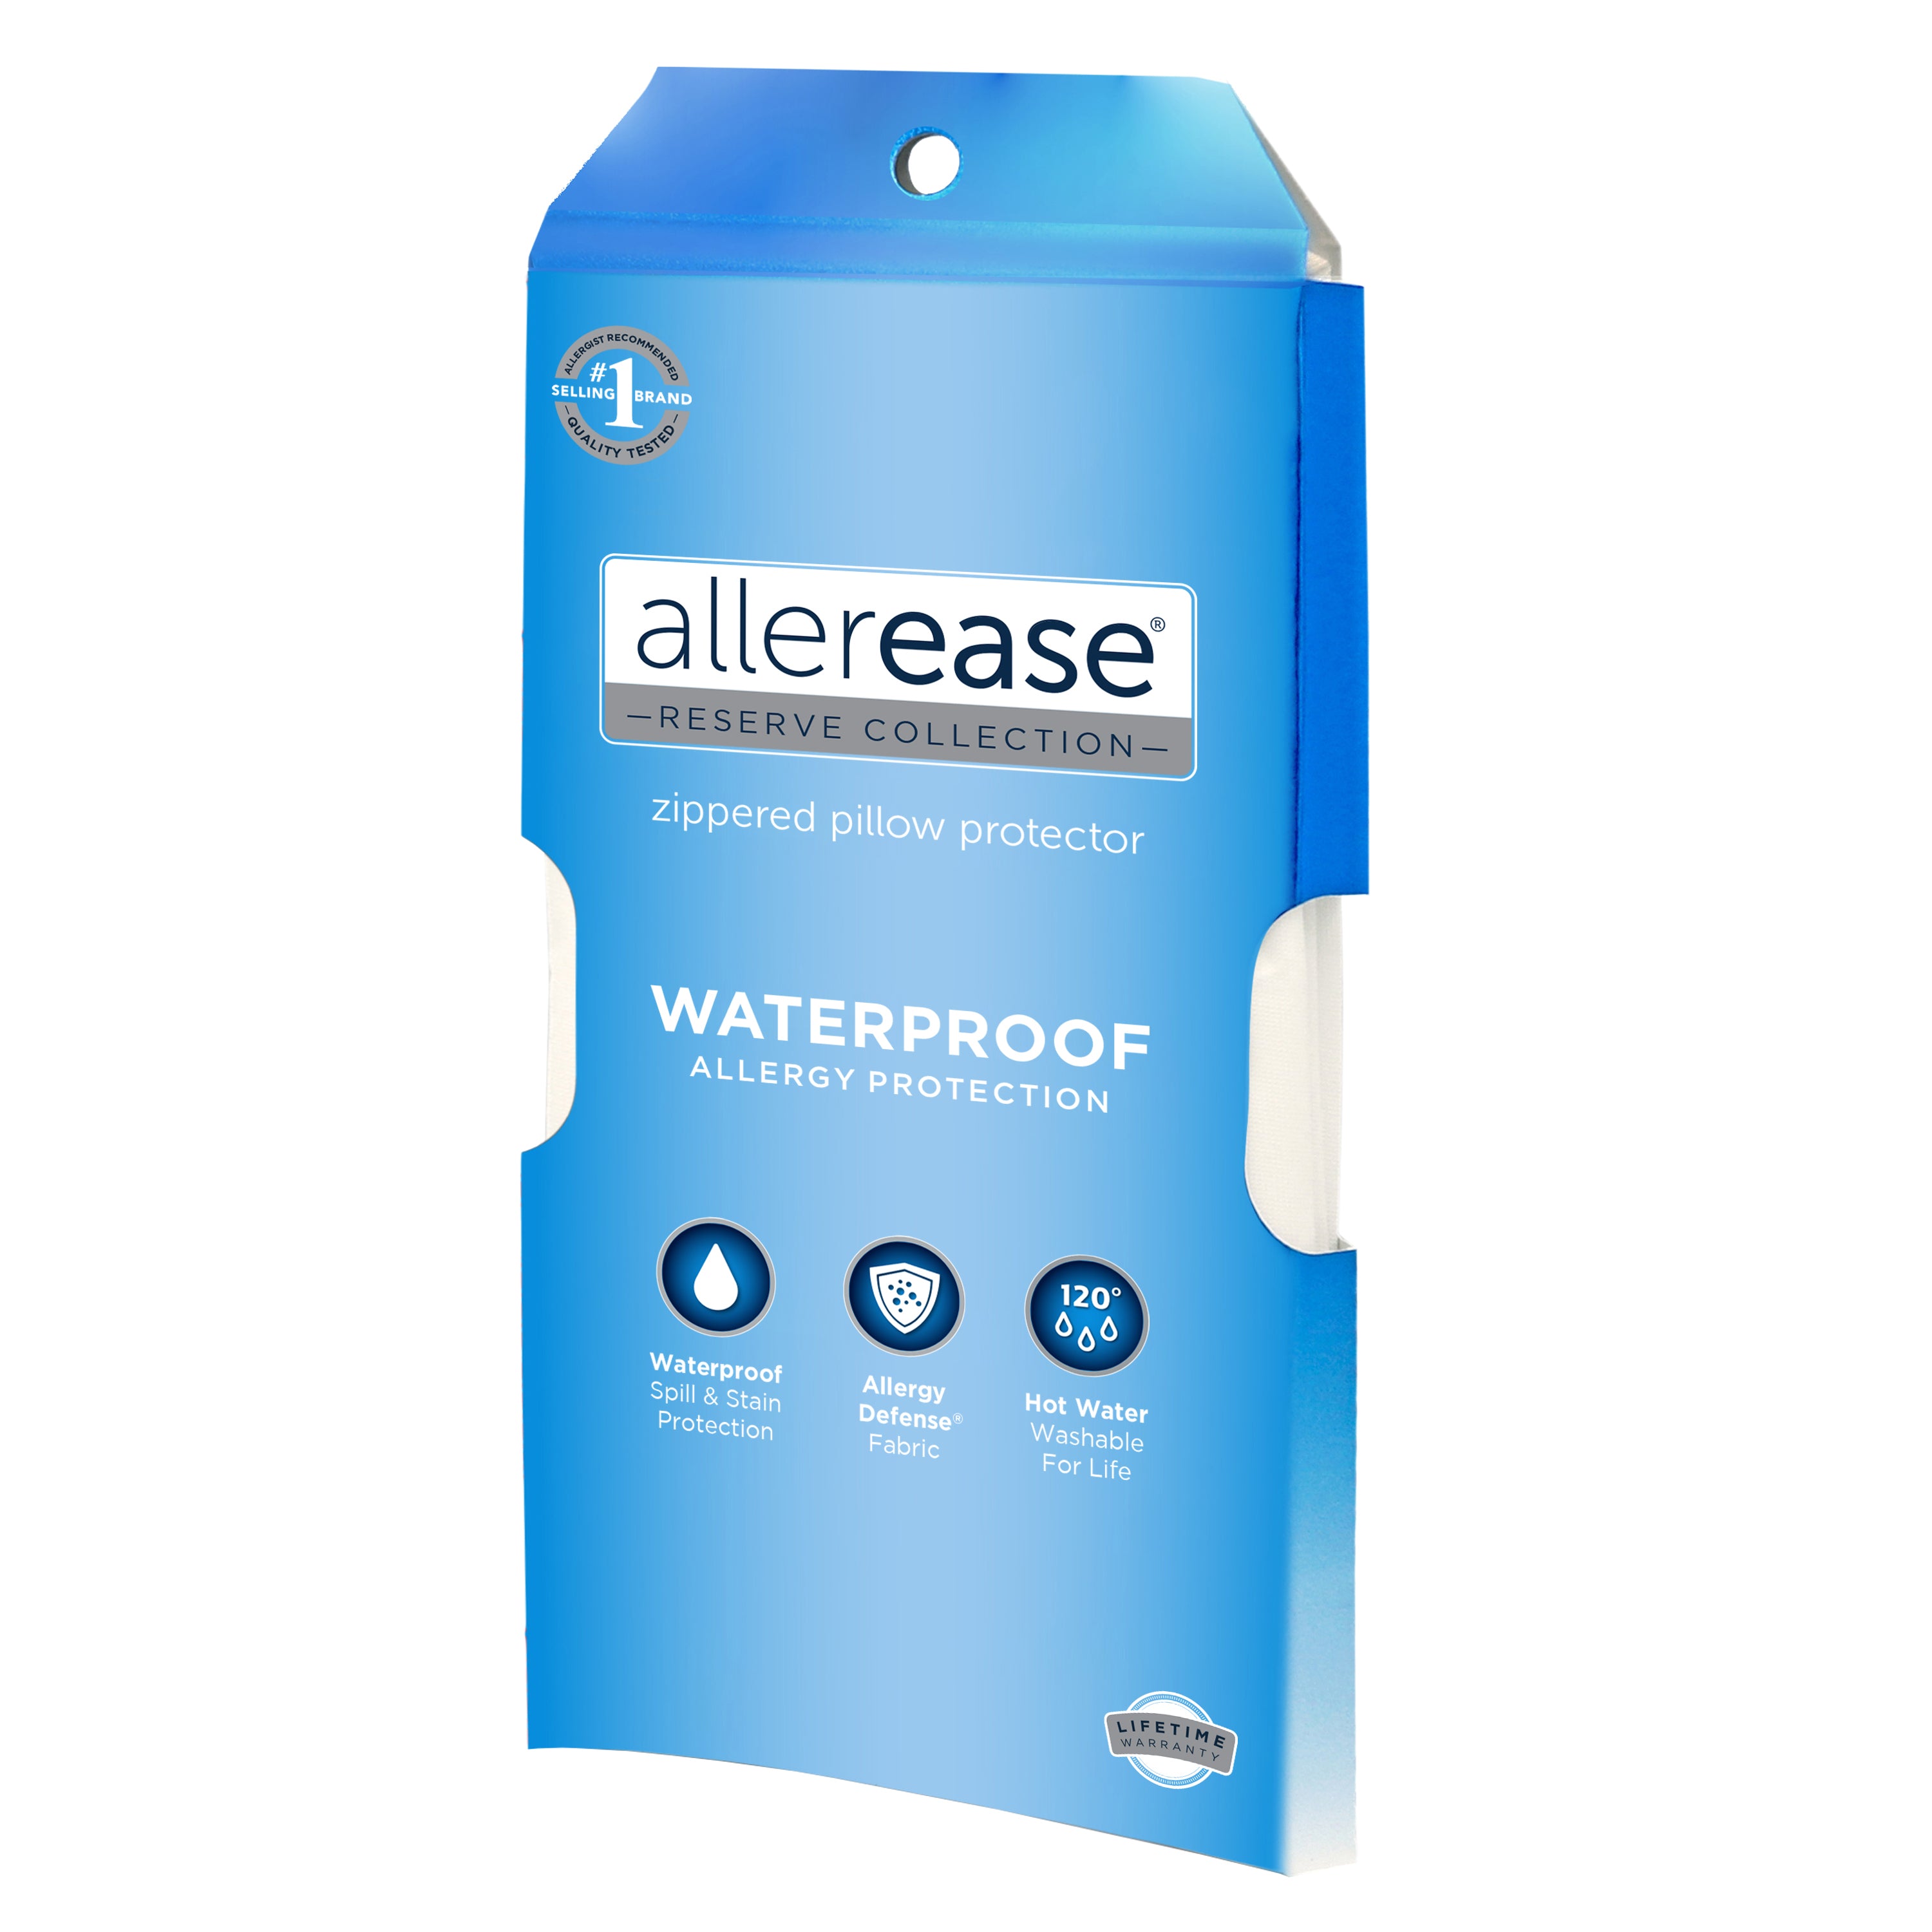 AllerEase Waterproof Allergy Protection Zippered Twin Mattress Protector